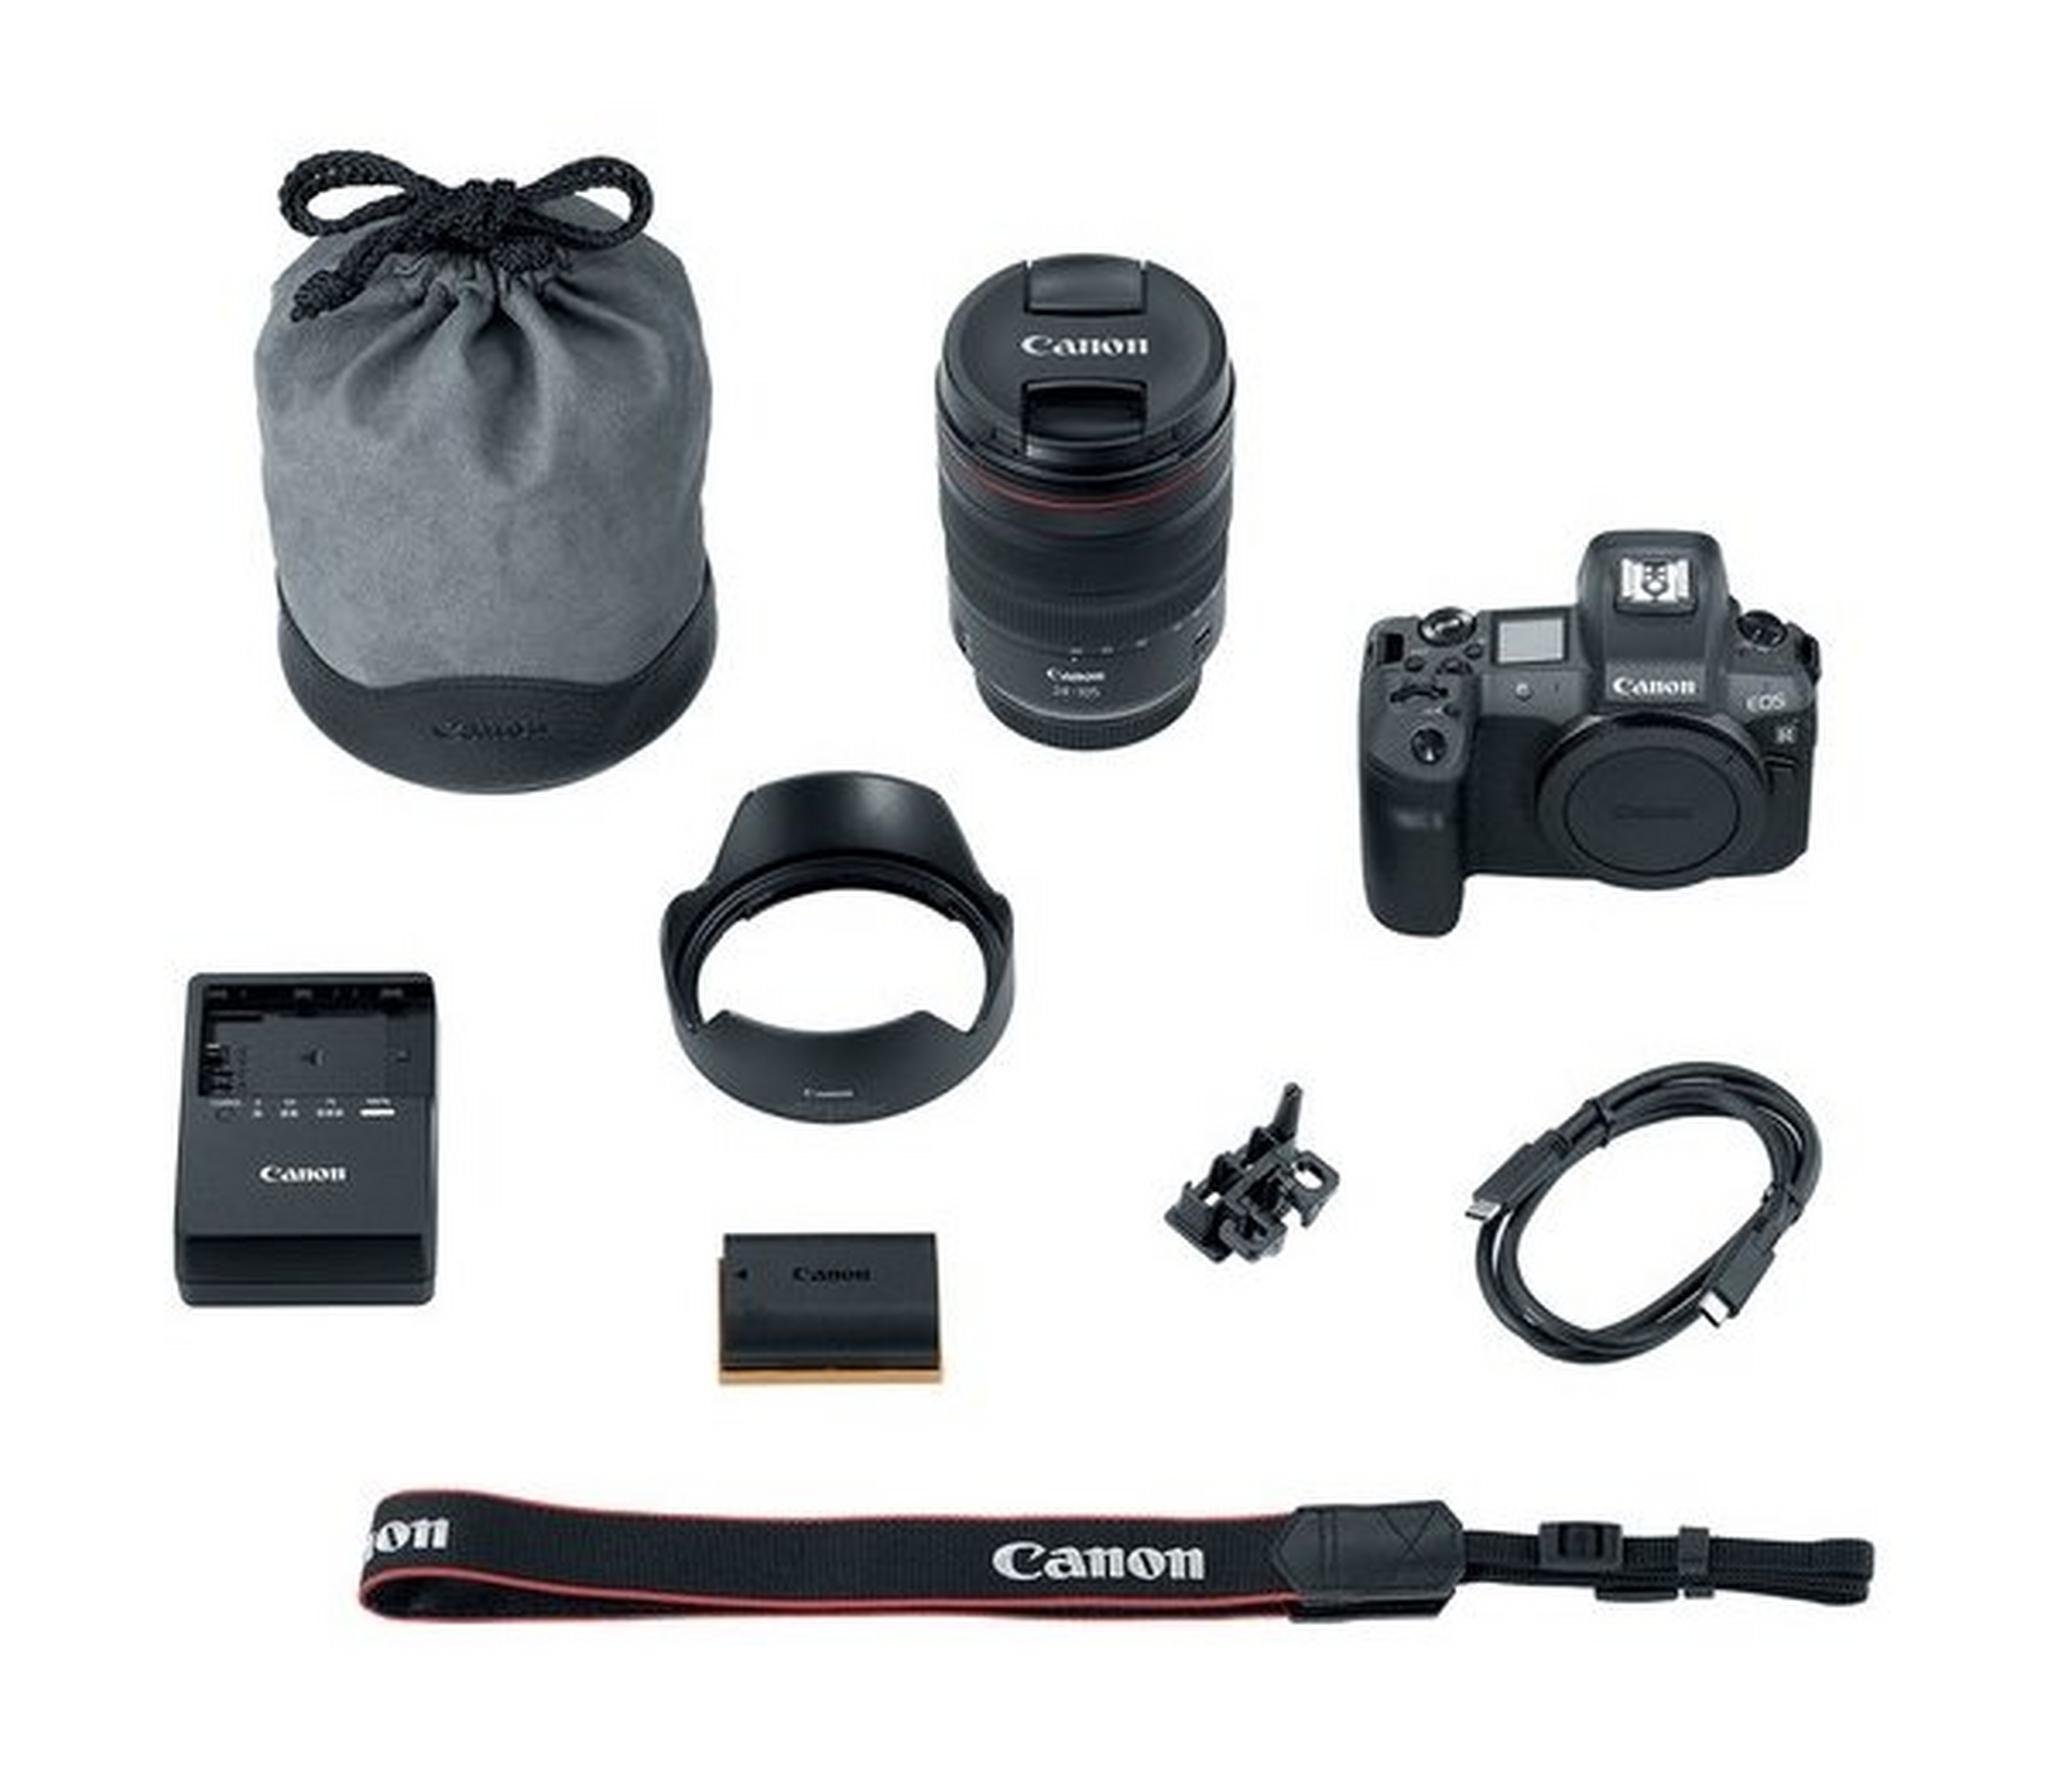 Canon EOS R Mirrorless Digital Camera with 24-105mm Lens + Mount Adapter EU26